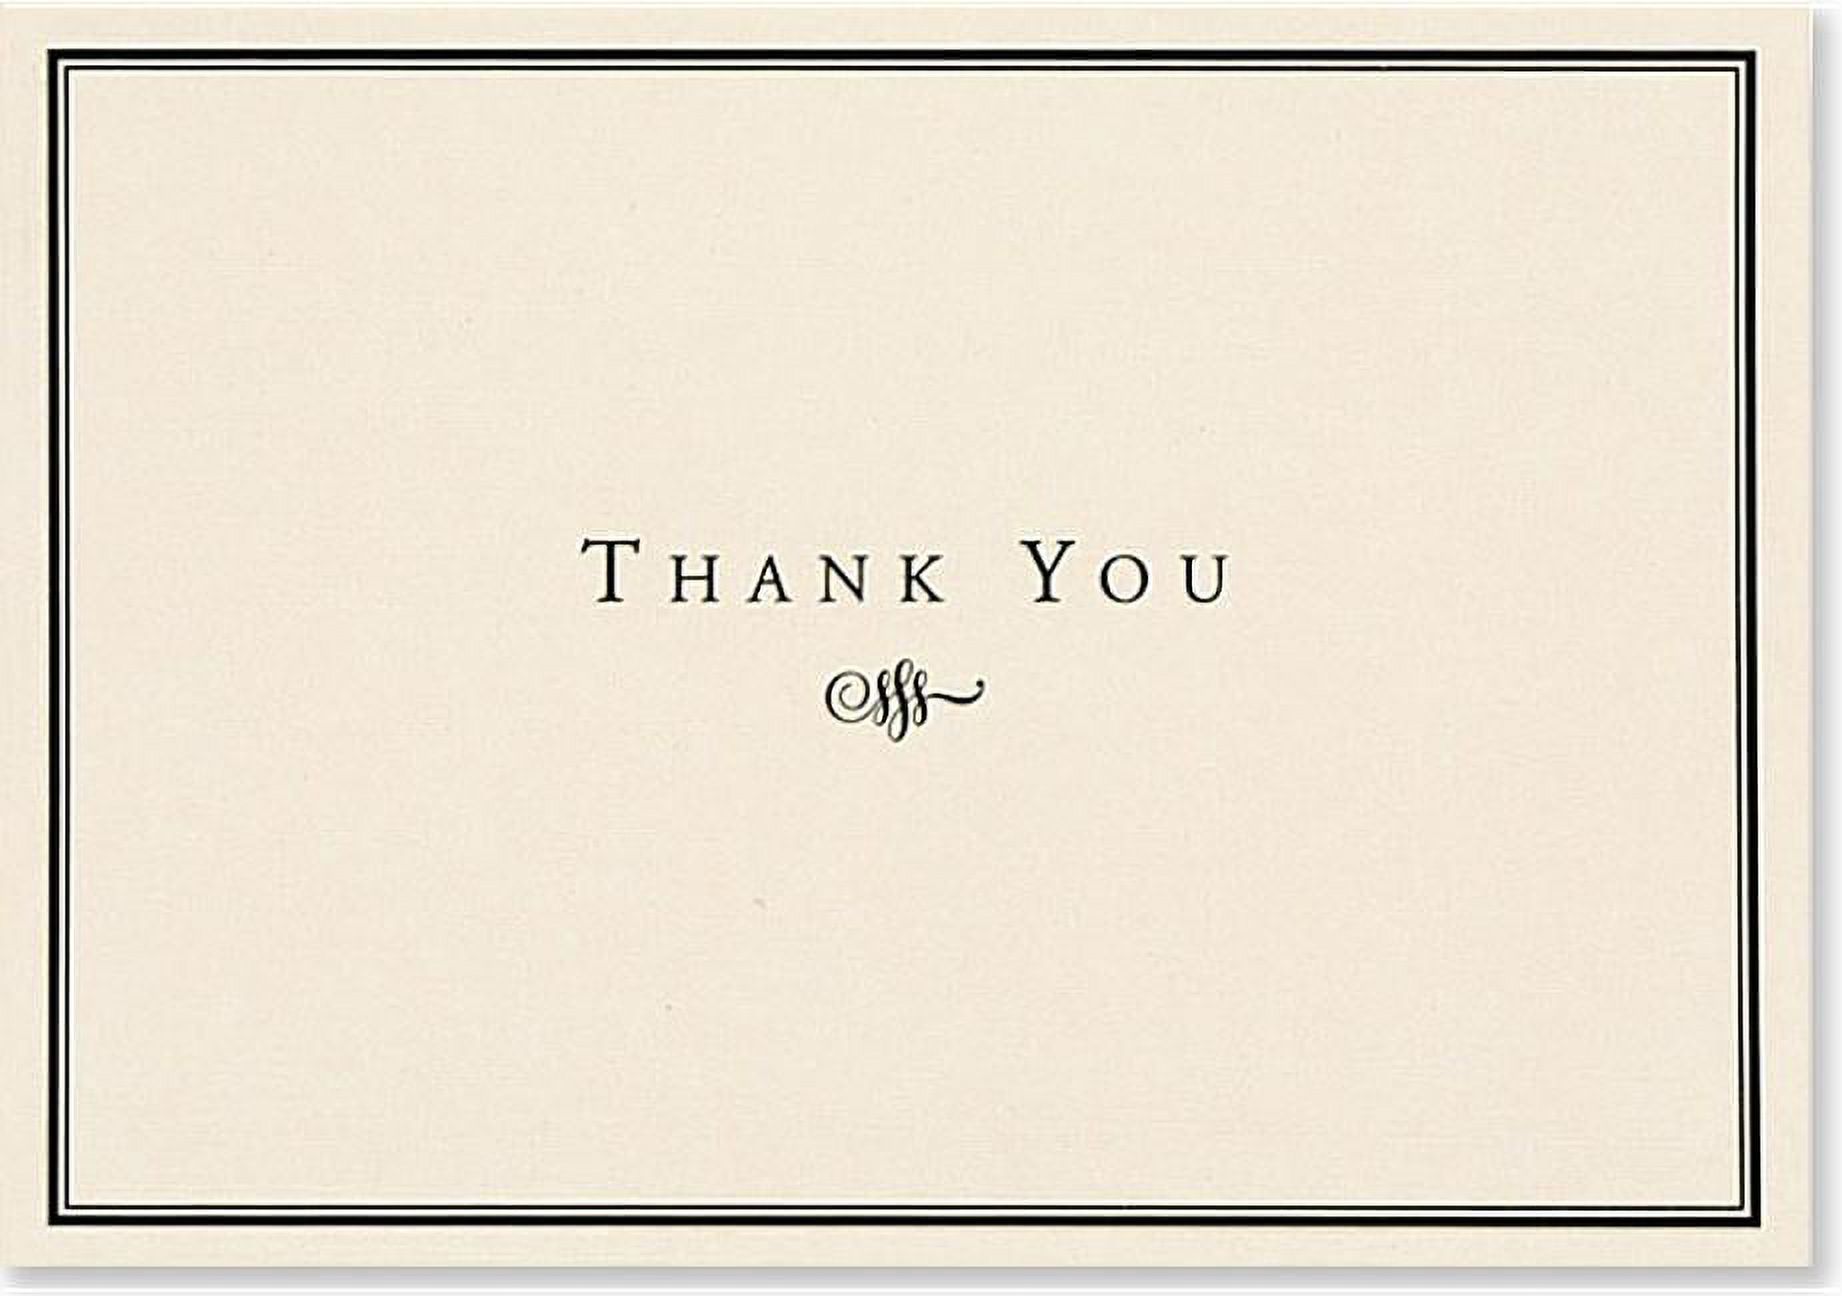 Black & Cream Thank You Notes - image 1 of 1